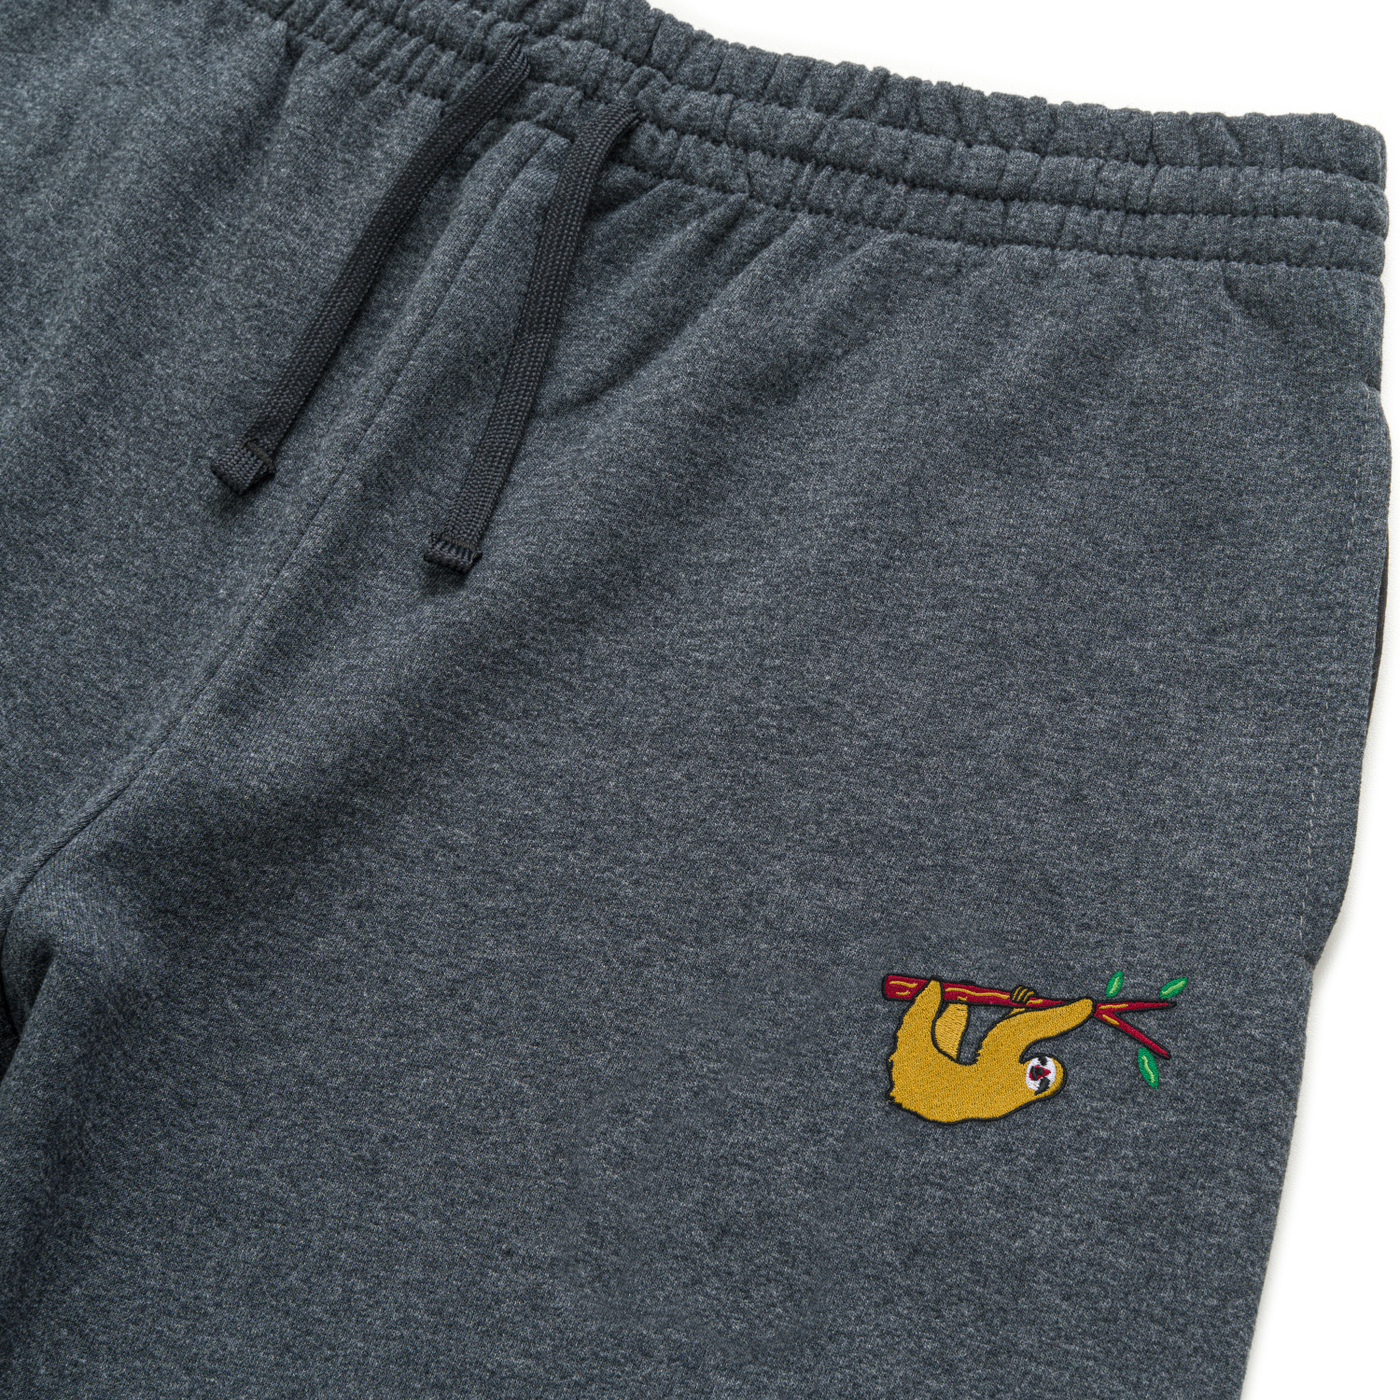 Bobby's Planet Unisex Embroidered Sloth Joggers from South American Amazon Animals Collection in Black Heather Color#color_black-heather